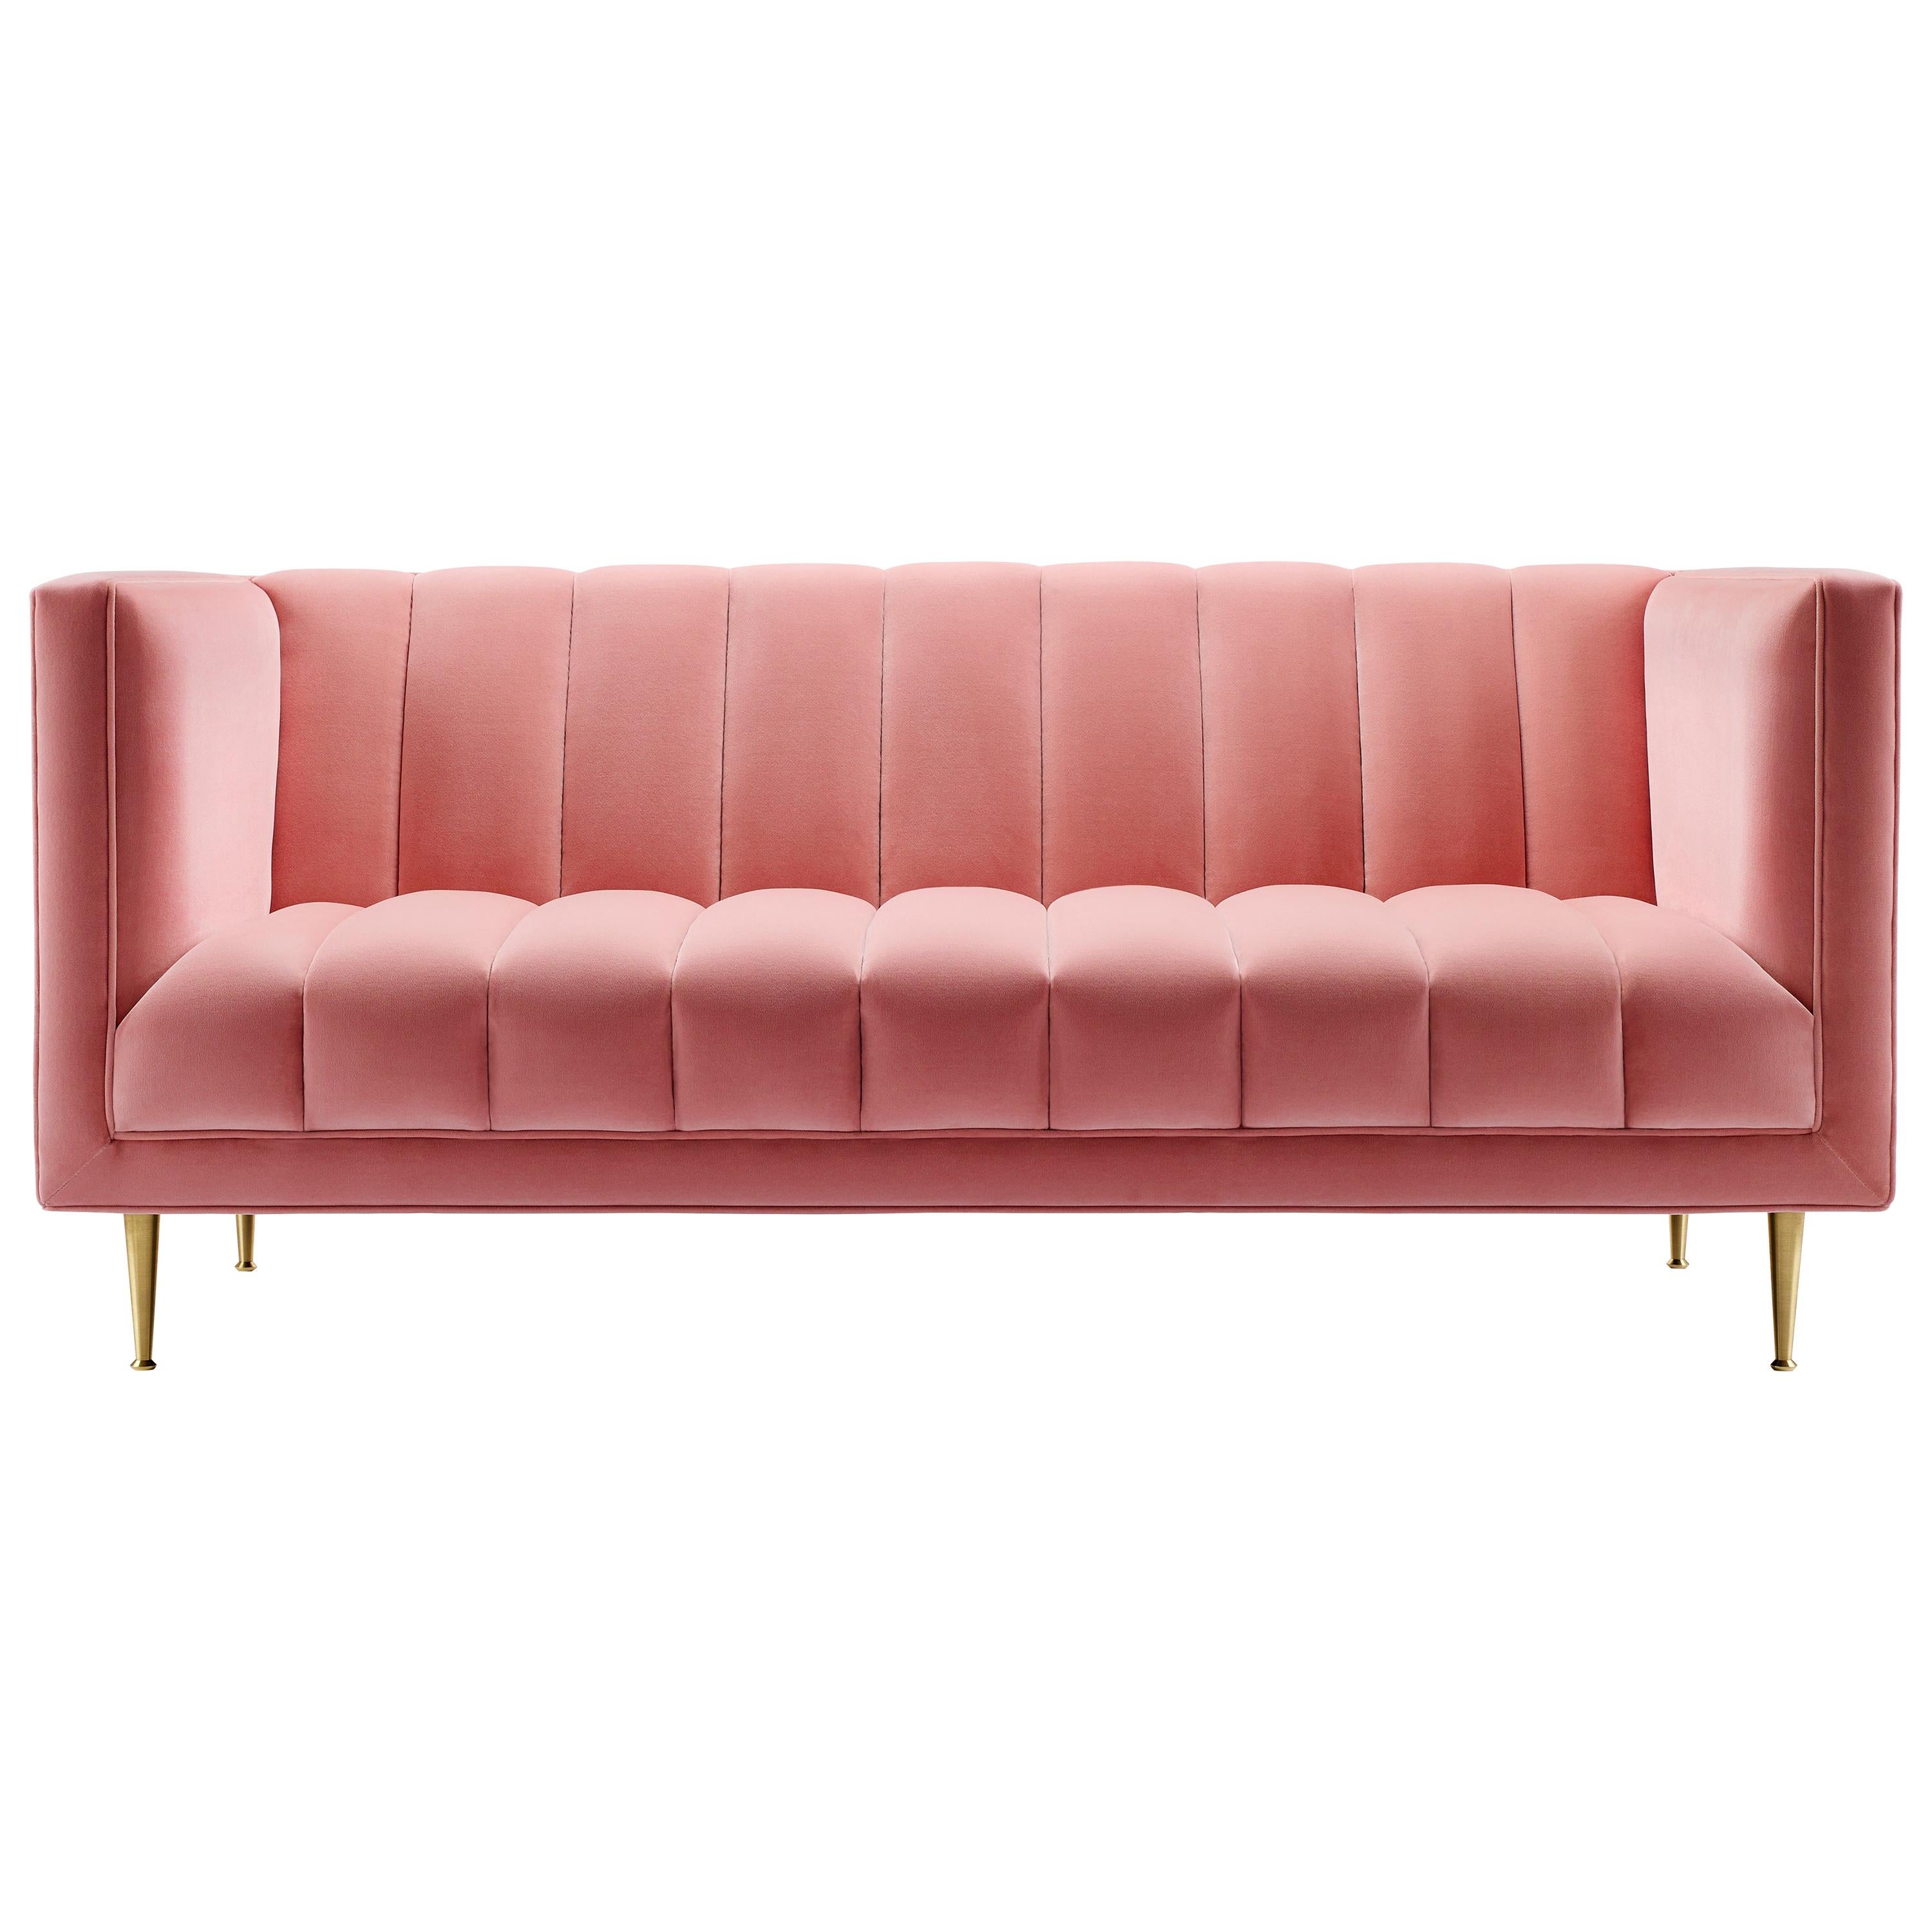 Contemporary Channeled 2-Seater Fleure Sofa in Pink Cotton Velvet and Brass Legs